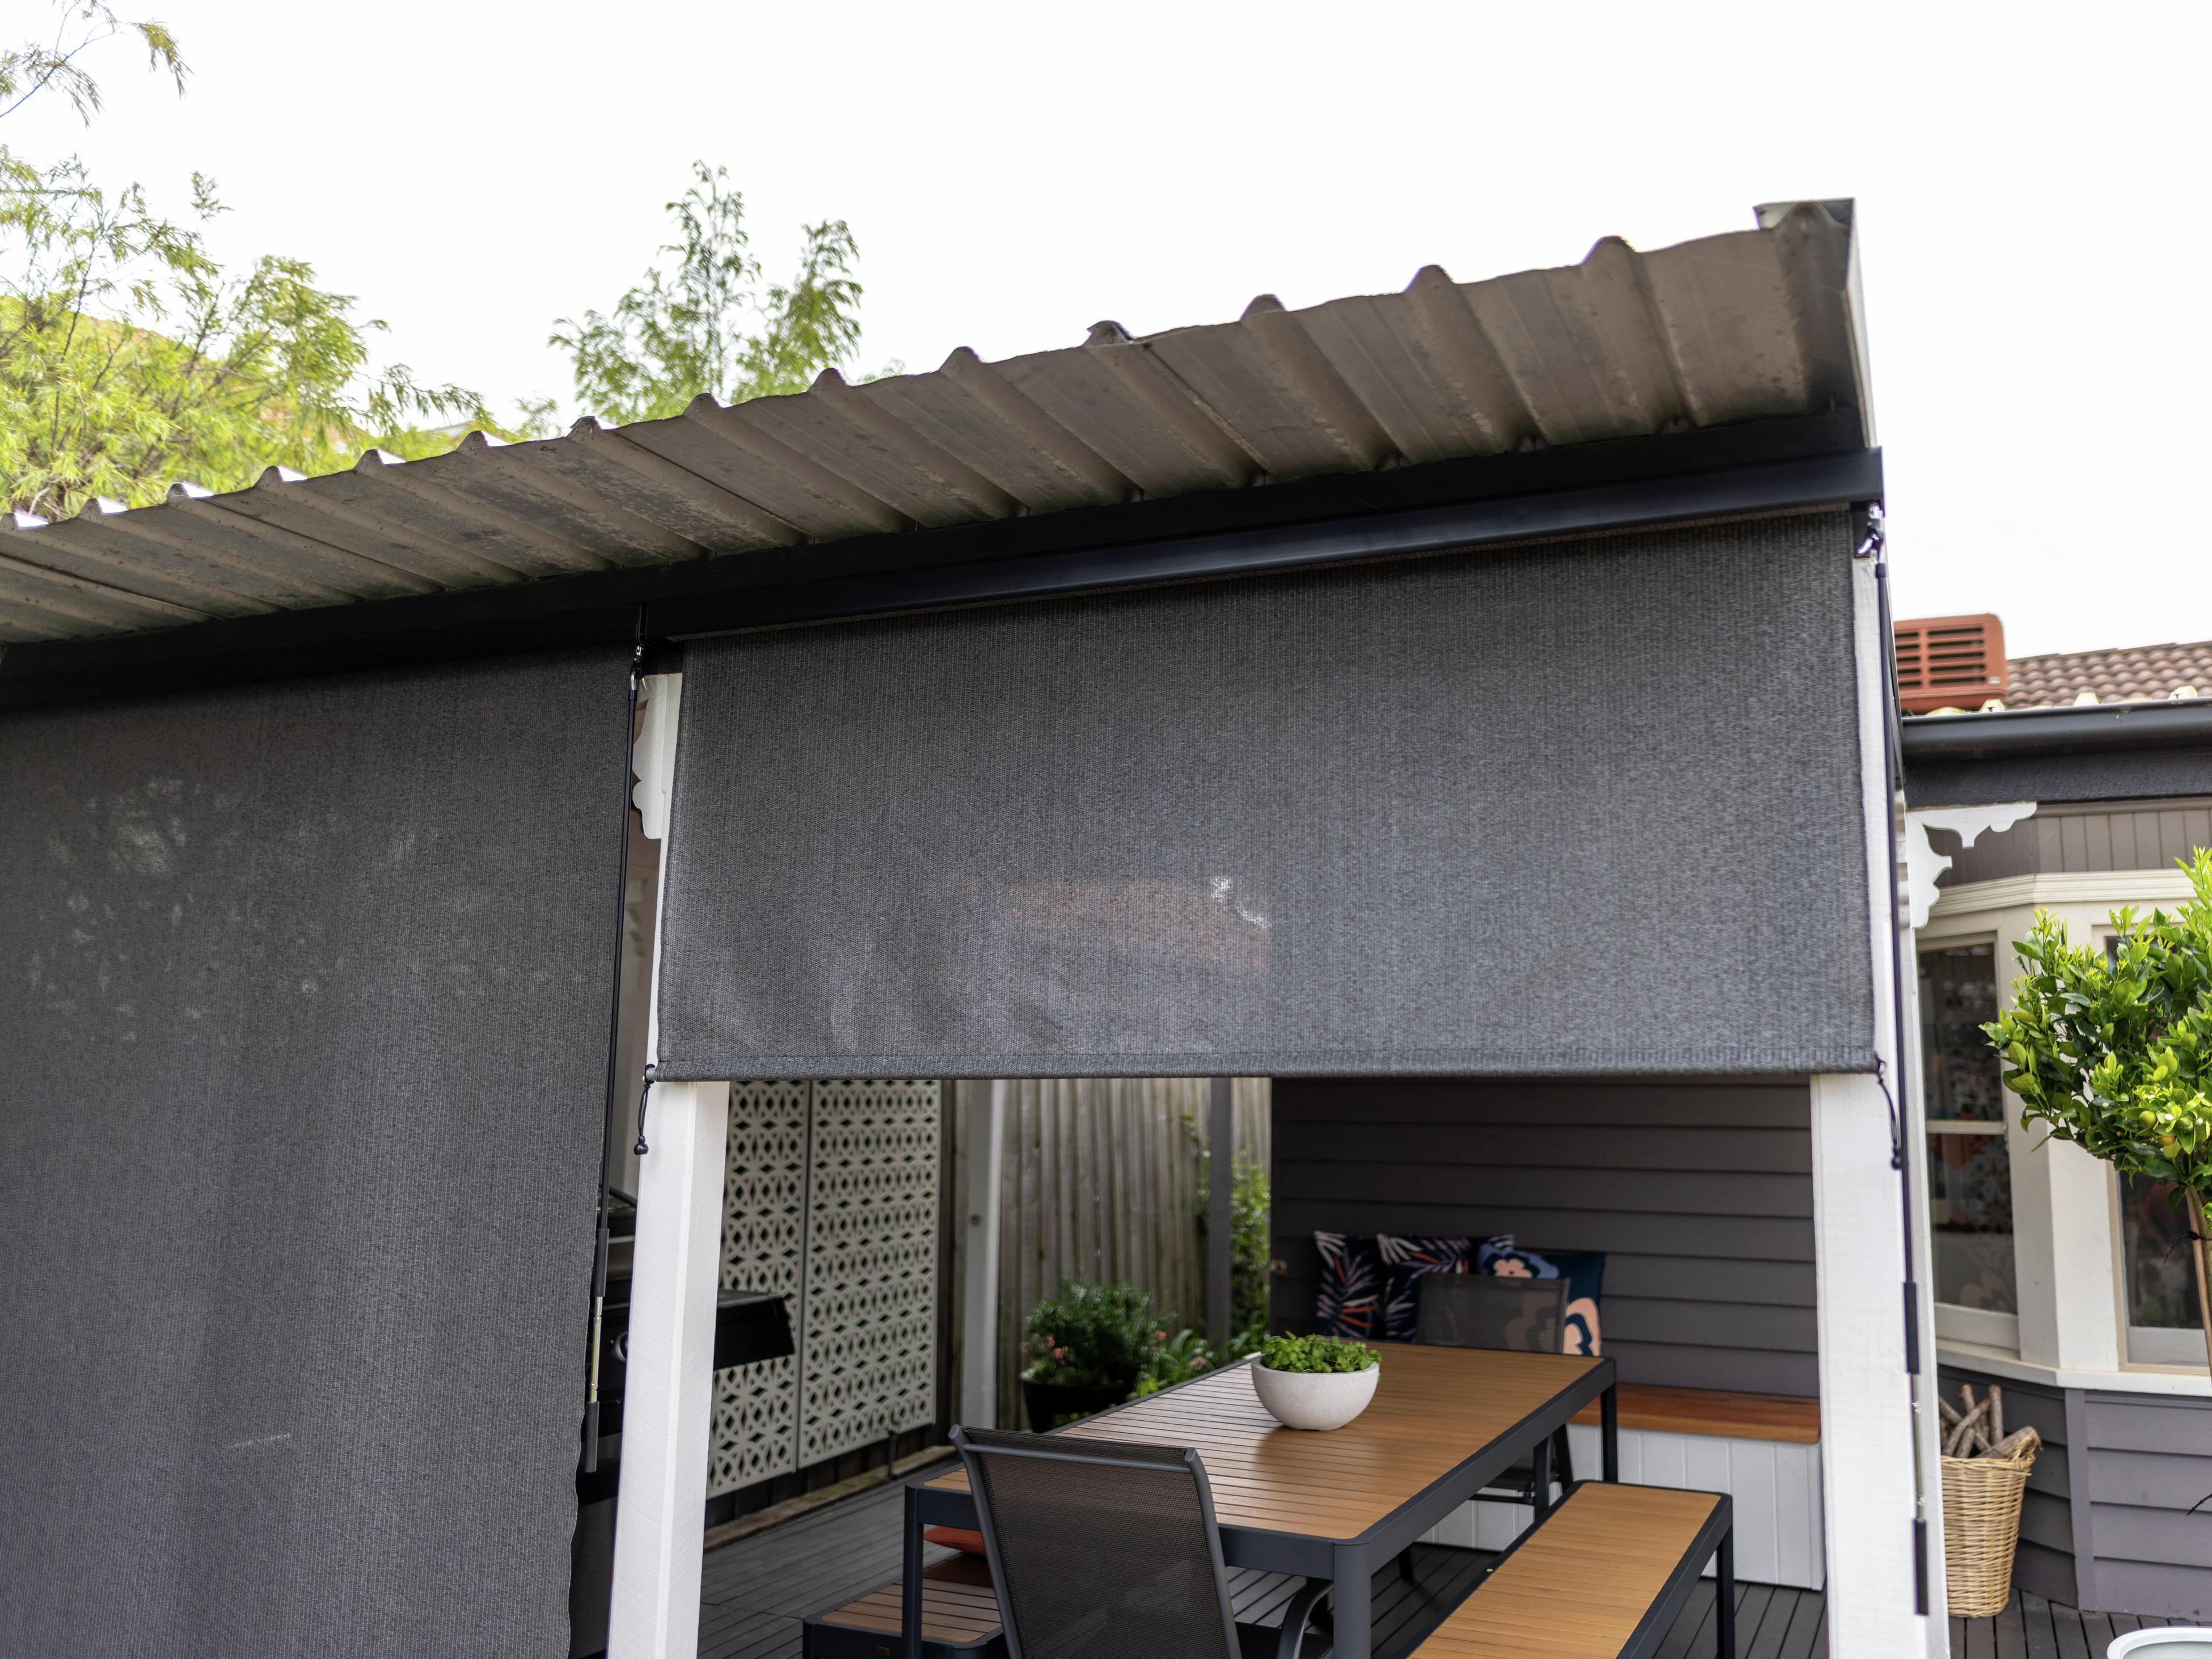 How To Install Outdoor Roller Blinds - Bunnings Australia